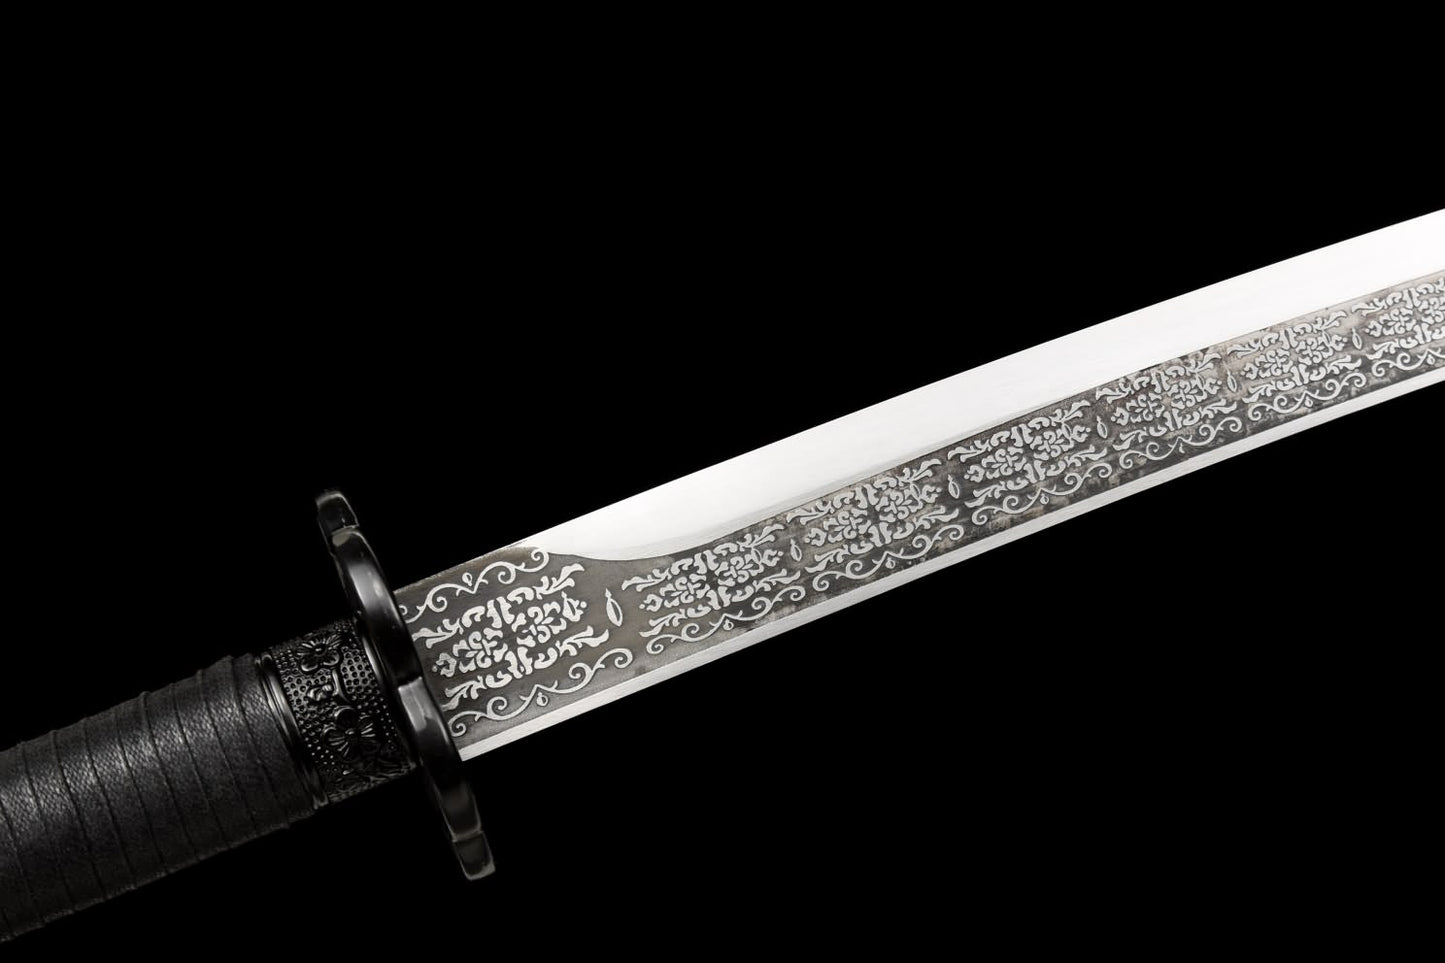 Qing dao Swords Real,Hand Forged High Carbon Steel Etched Blade,Alloy Fittings